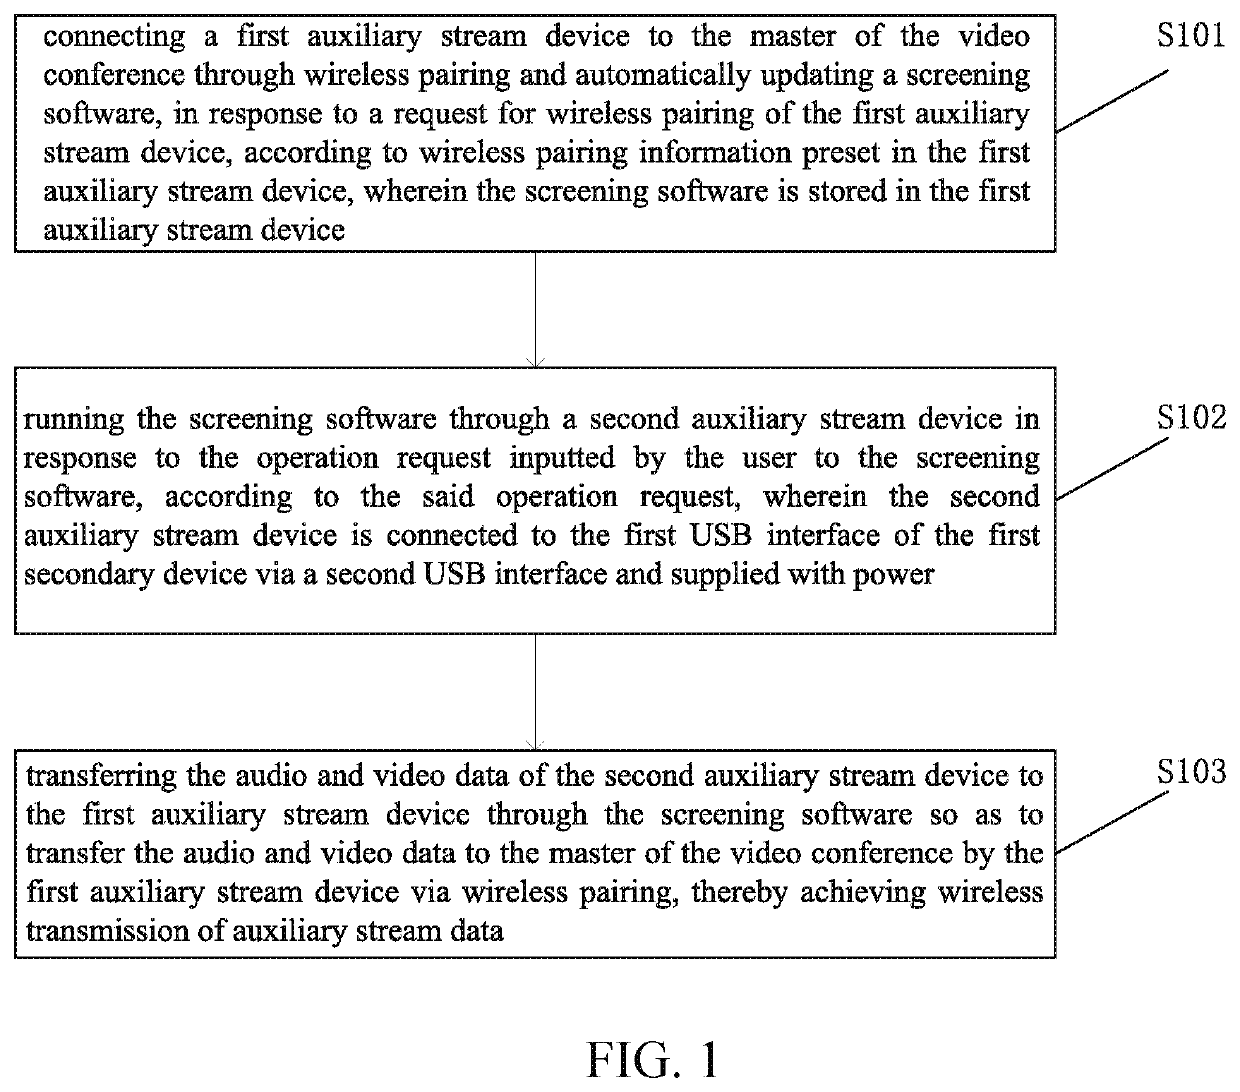 Methods and systems for wireless transmission of auxiliary stream data based on video conference systems